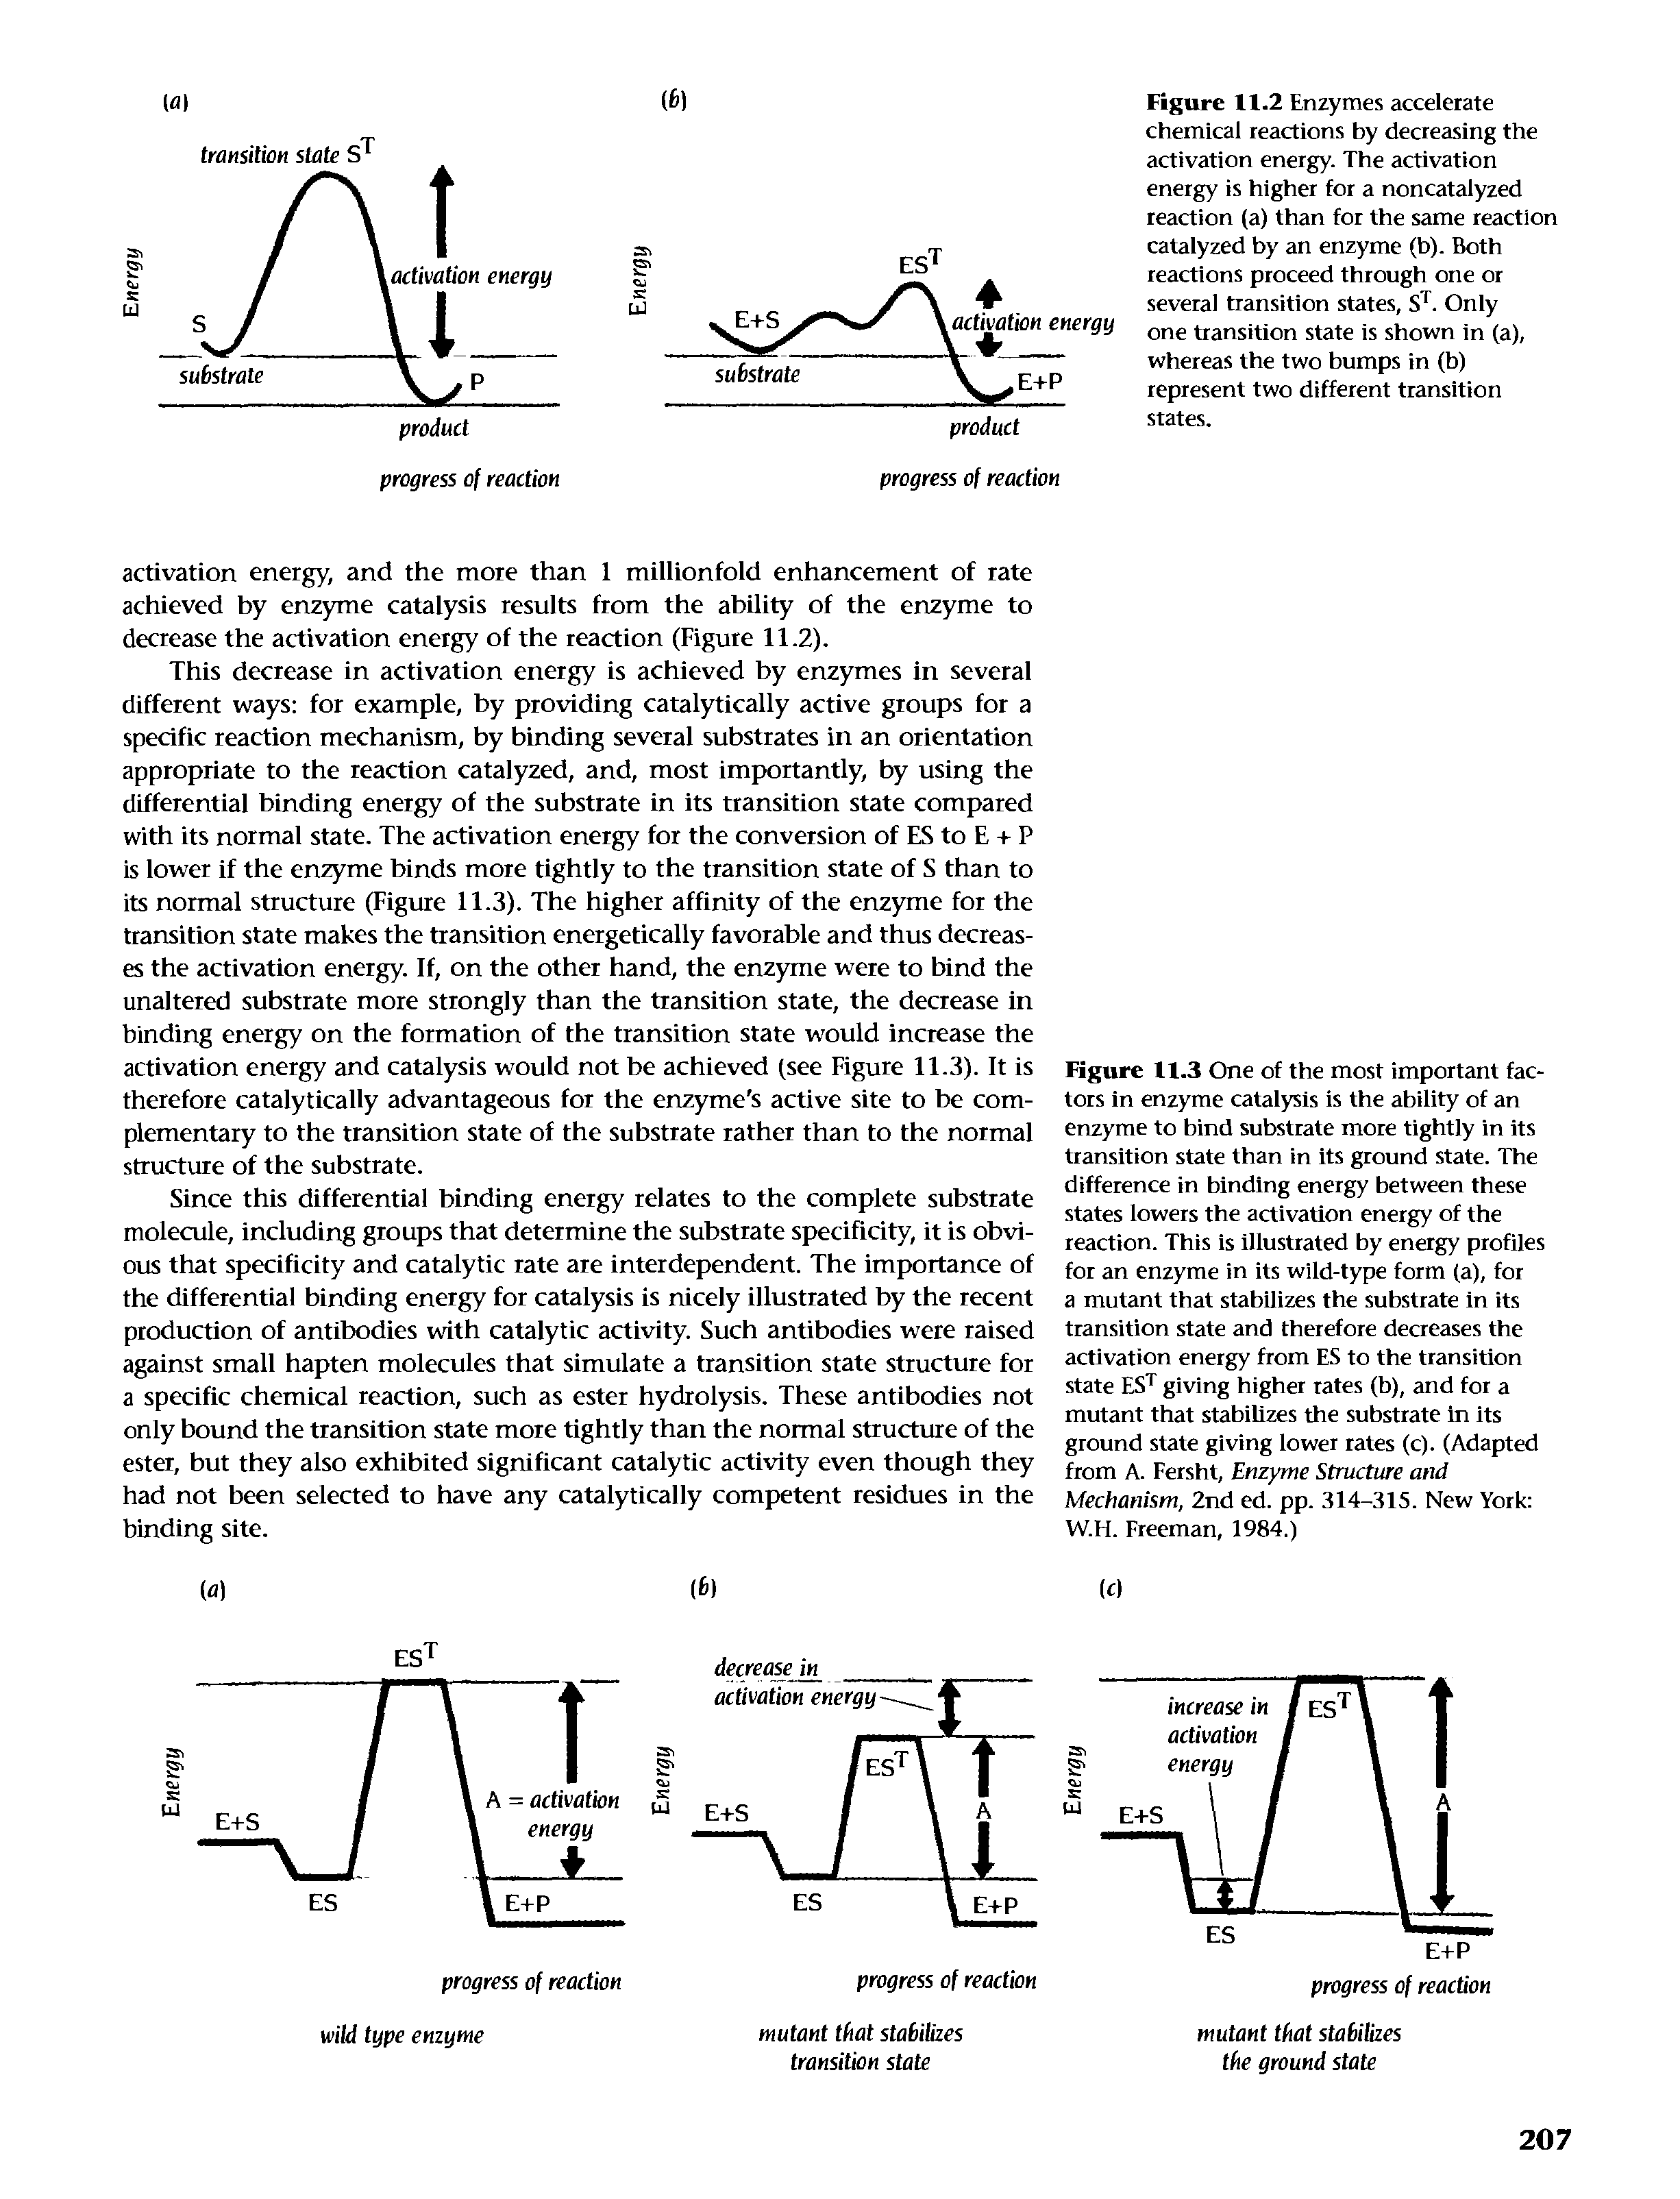 Figure 11.2 Enzymes accelerate chemical reactions by decreasing the activation energy. The activation energy is higher for a noncatalyzed reaction (a) than for the same reaction catalyzed by an enzyme (b). Both reactions proceed through one or several transition states, S. Only one transition state is shown in (a), whereas the two bumps in (b) represent two different transition states.